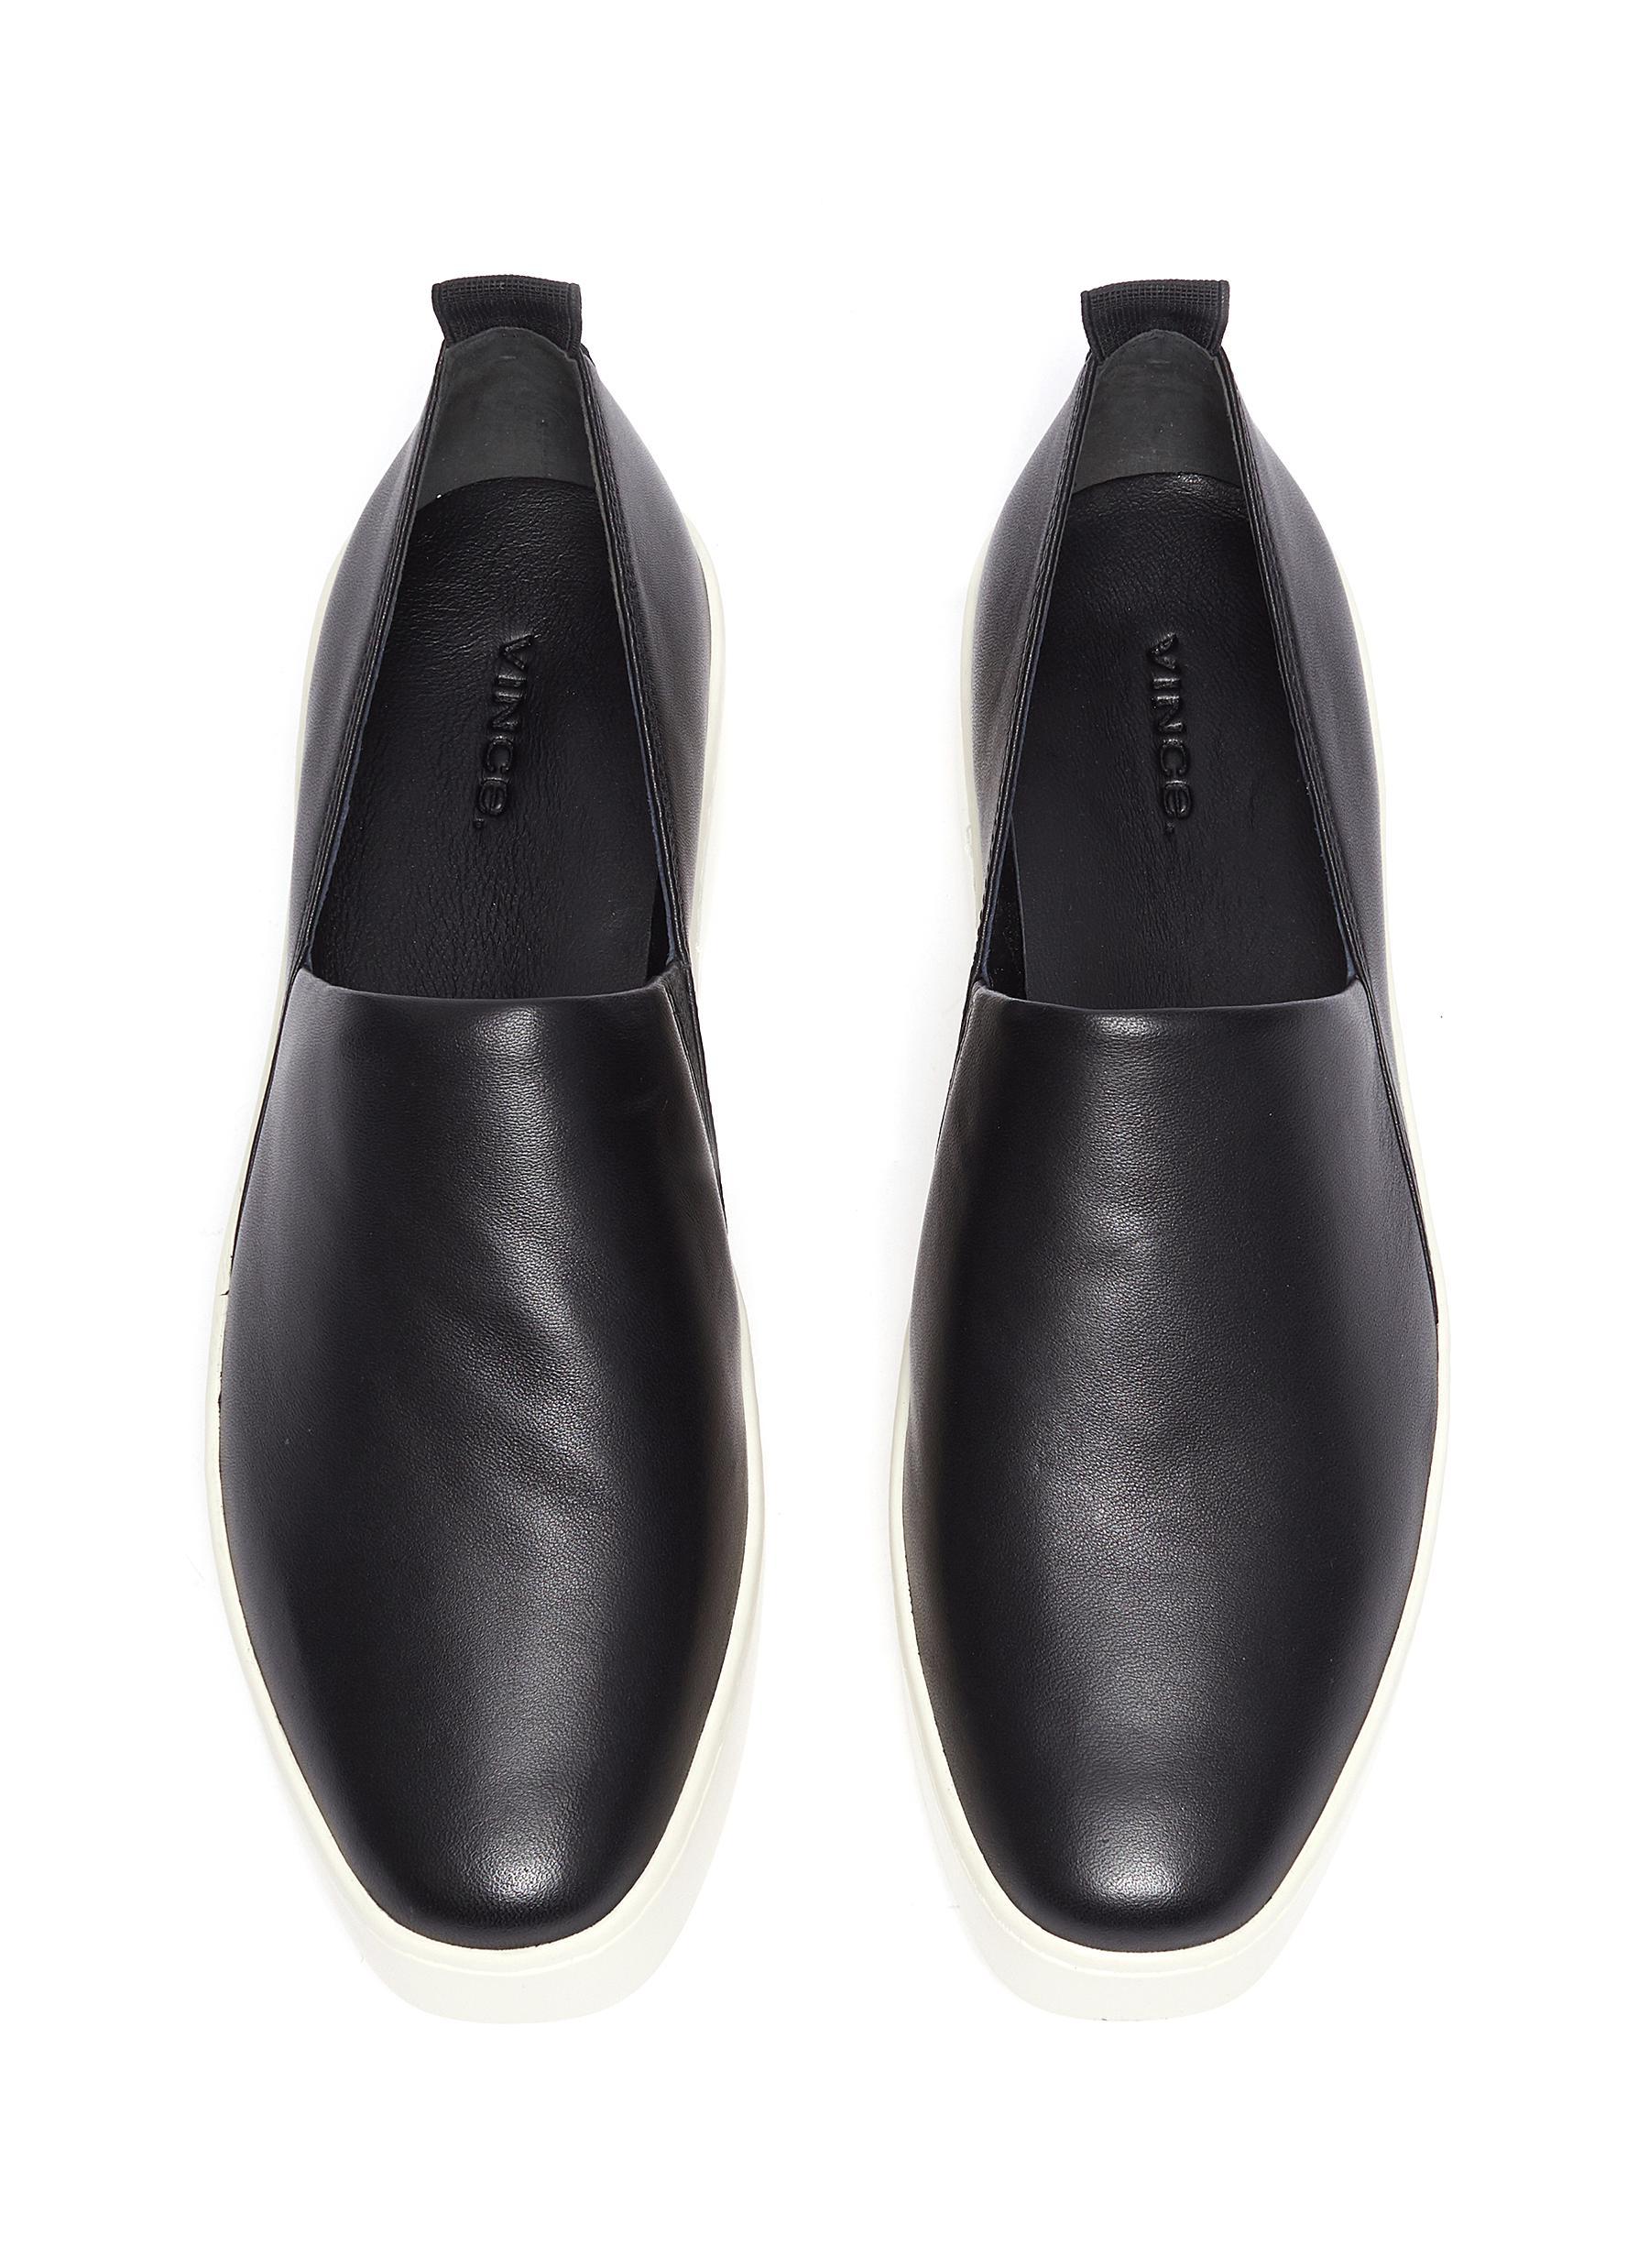 Vince 'saxon' Leather Slip-ons in Black - Lyst